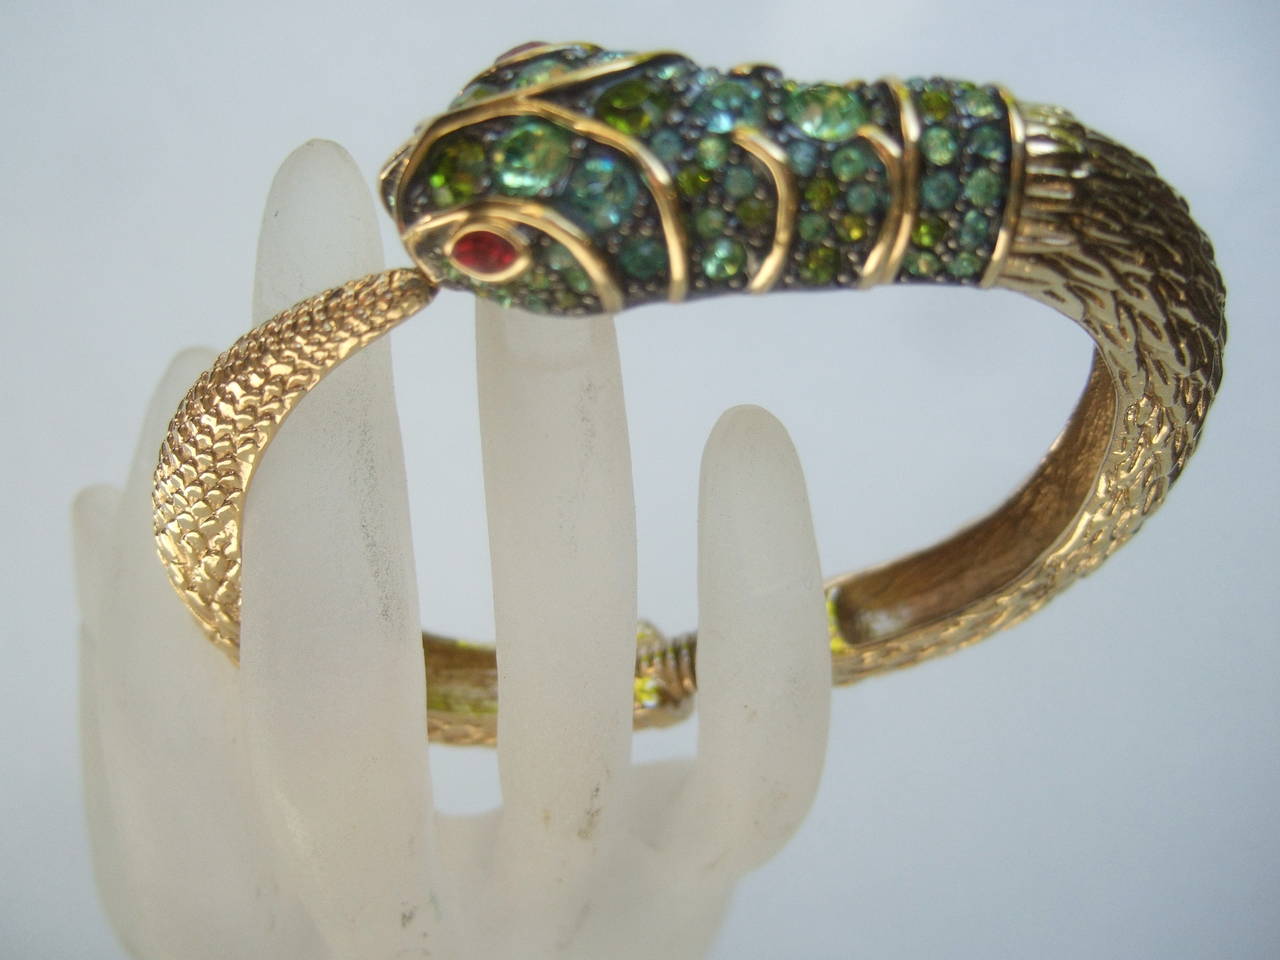 Ken Lane Exotic jeweled serpent bracelet c 1990 
The unique bracelet is designed with a coiled serpent
The serpent's head is encrusted with a collage of glittering
green crystals in various colors & sizes

The coiled serpent's body is designed